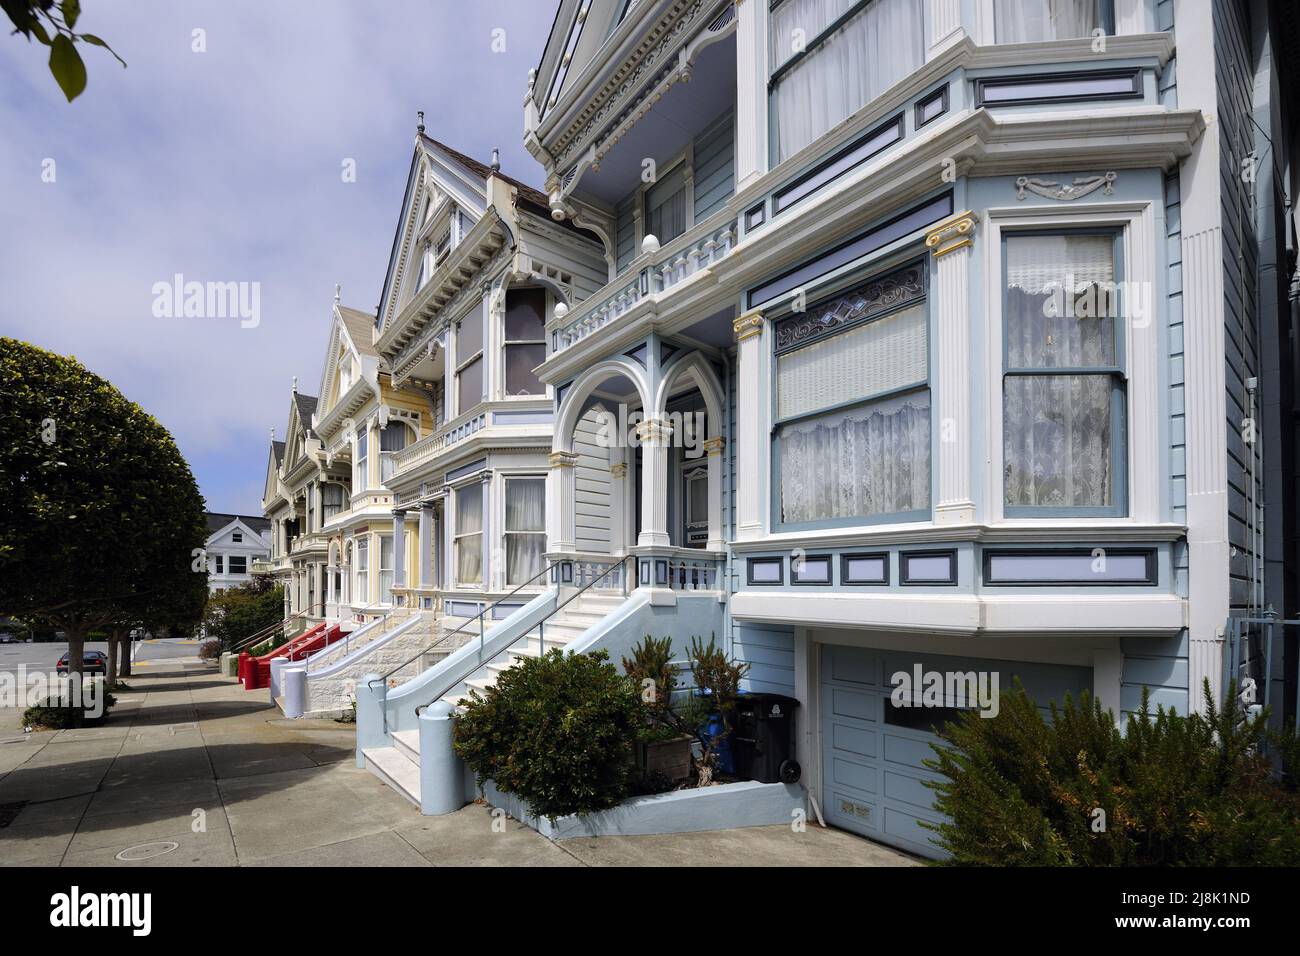 houses in Victorian style, Painted Ladies, Alamo Square, USA, California, San Francisco Stock Photo